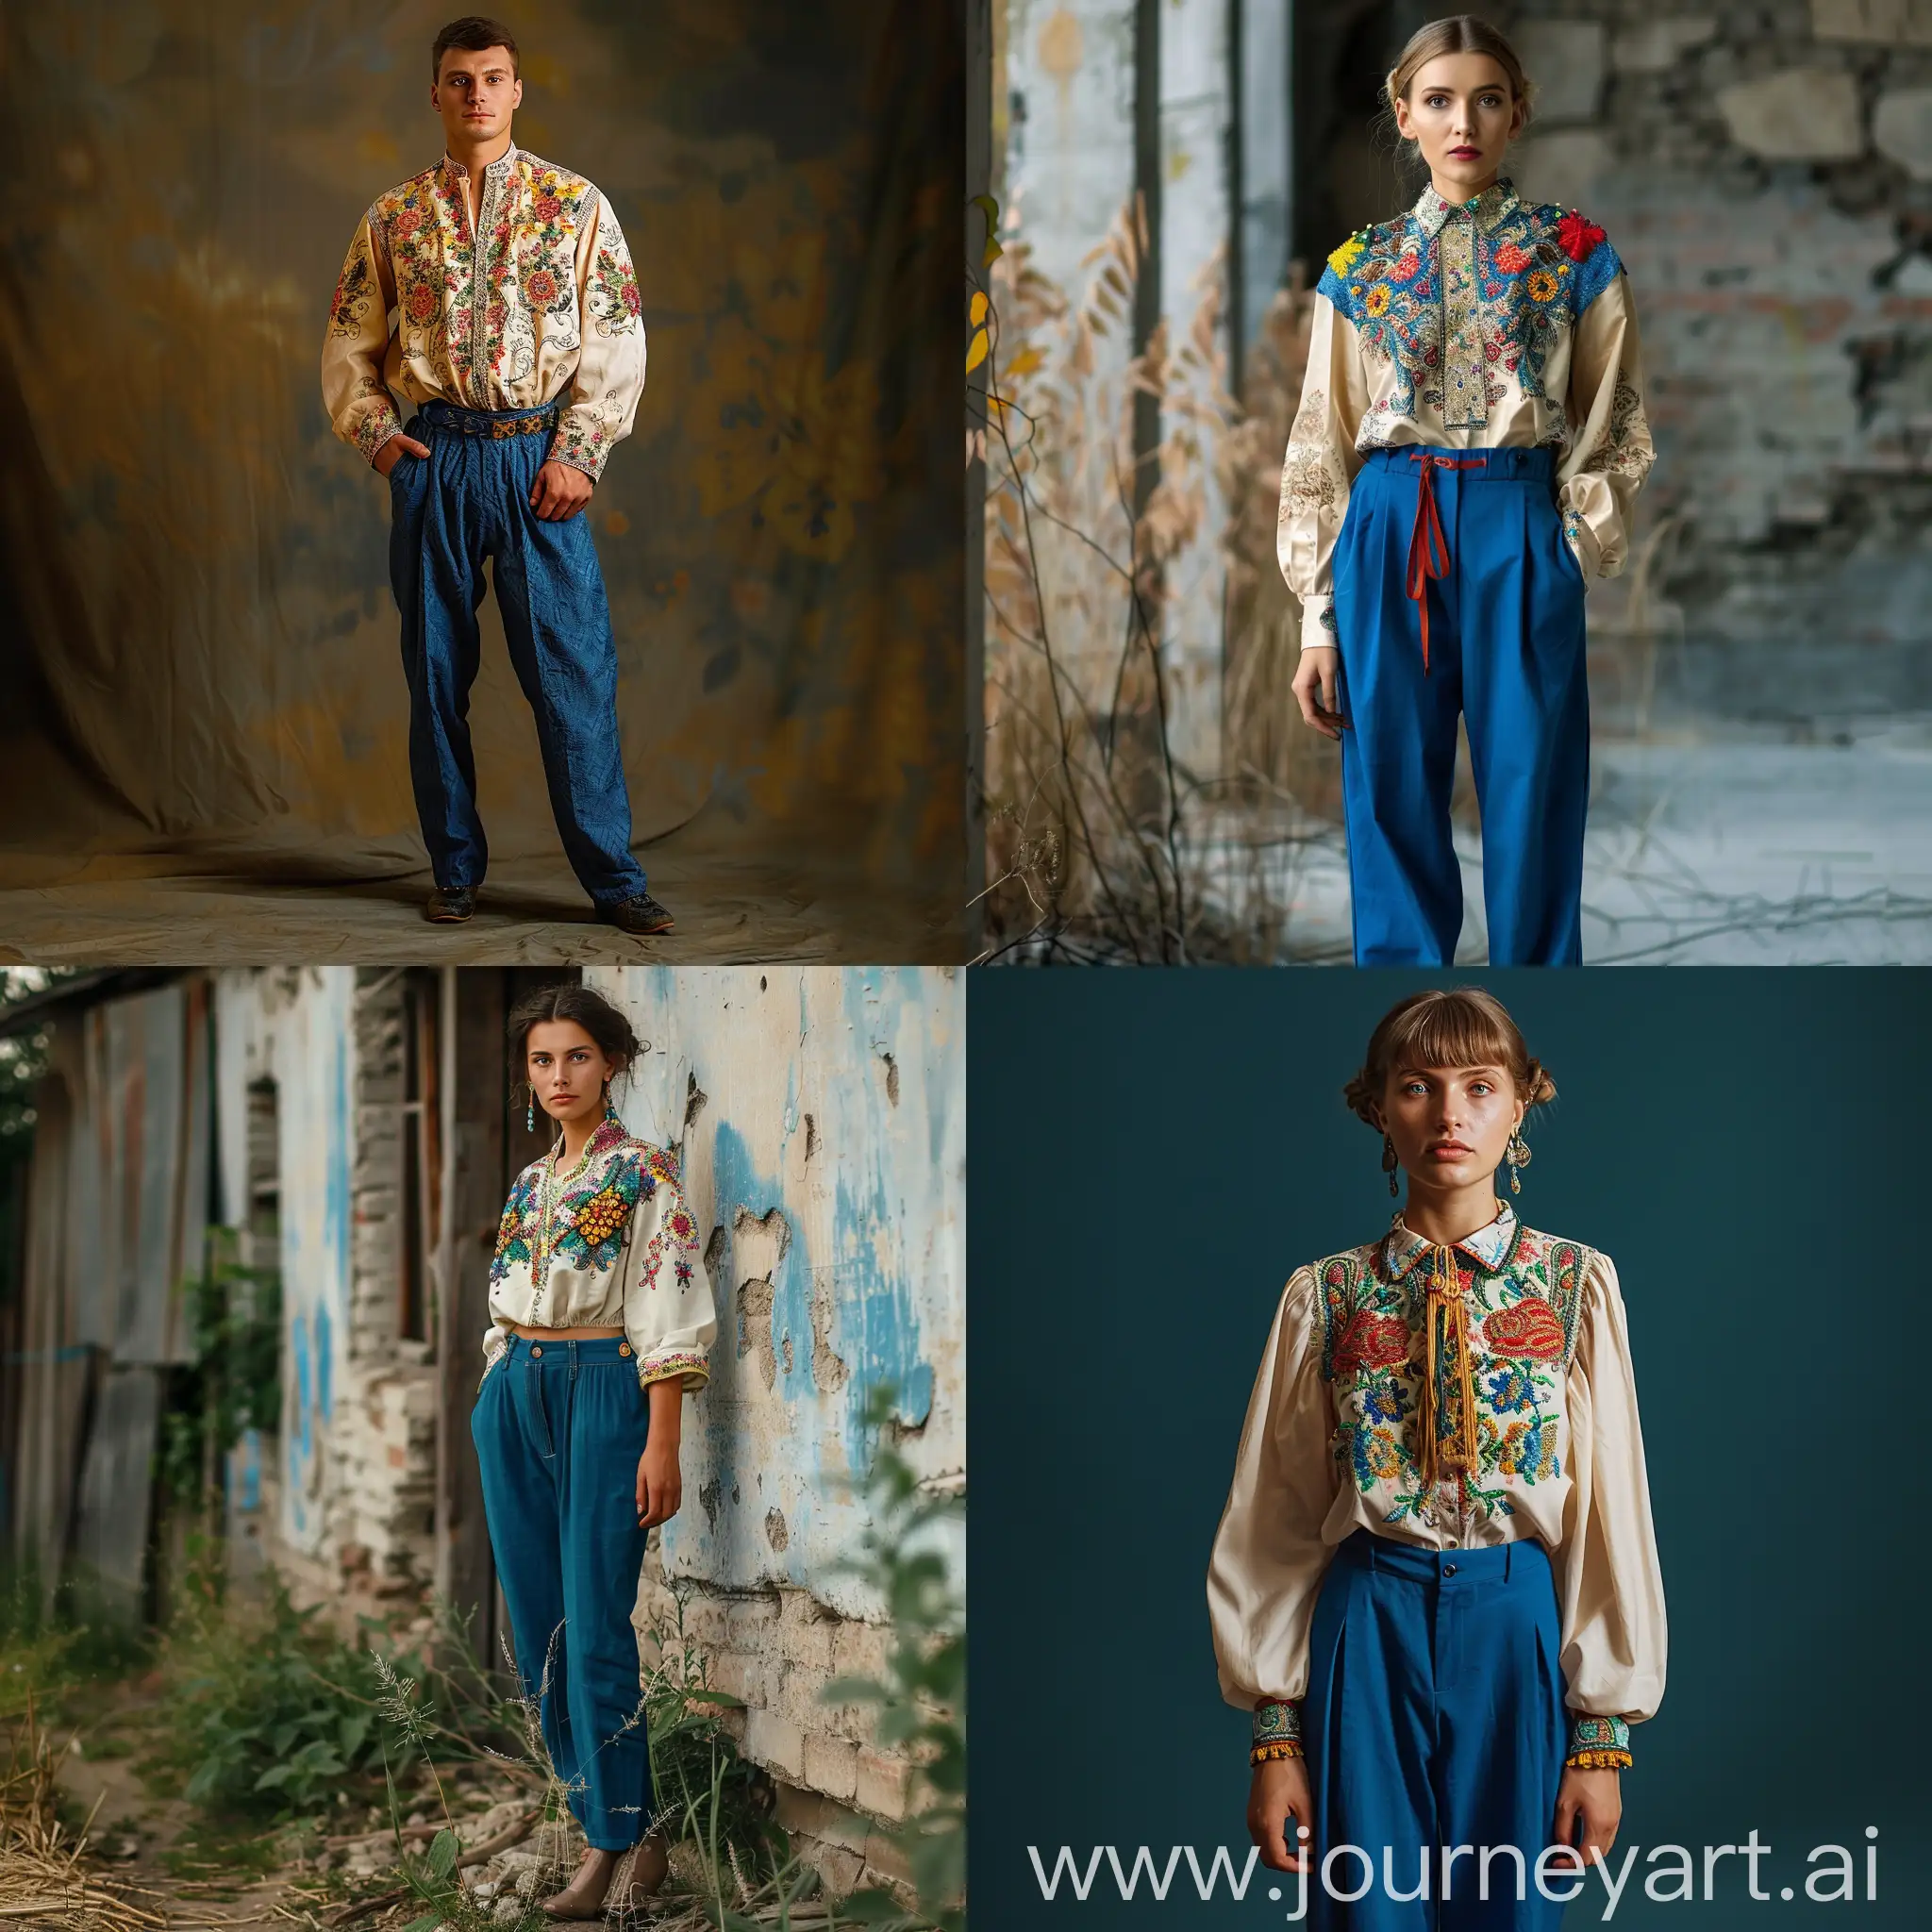 Ukrainian in embroidered shirt and blue trousers